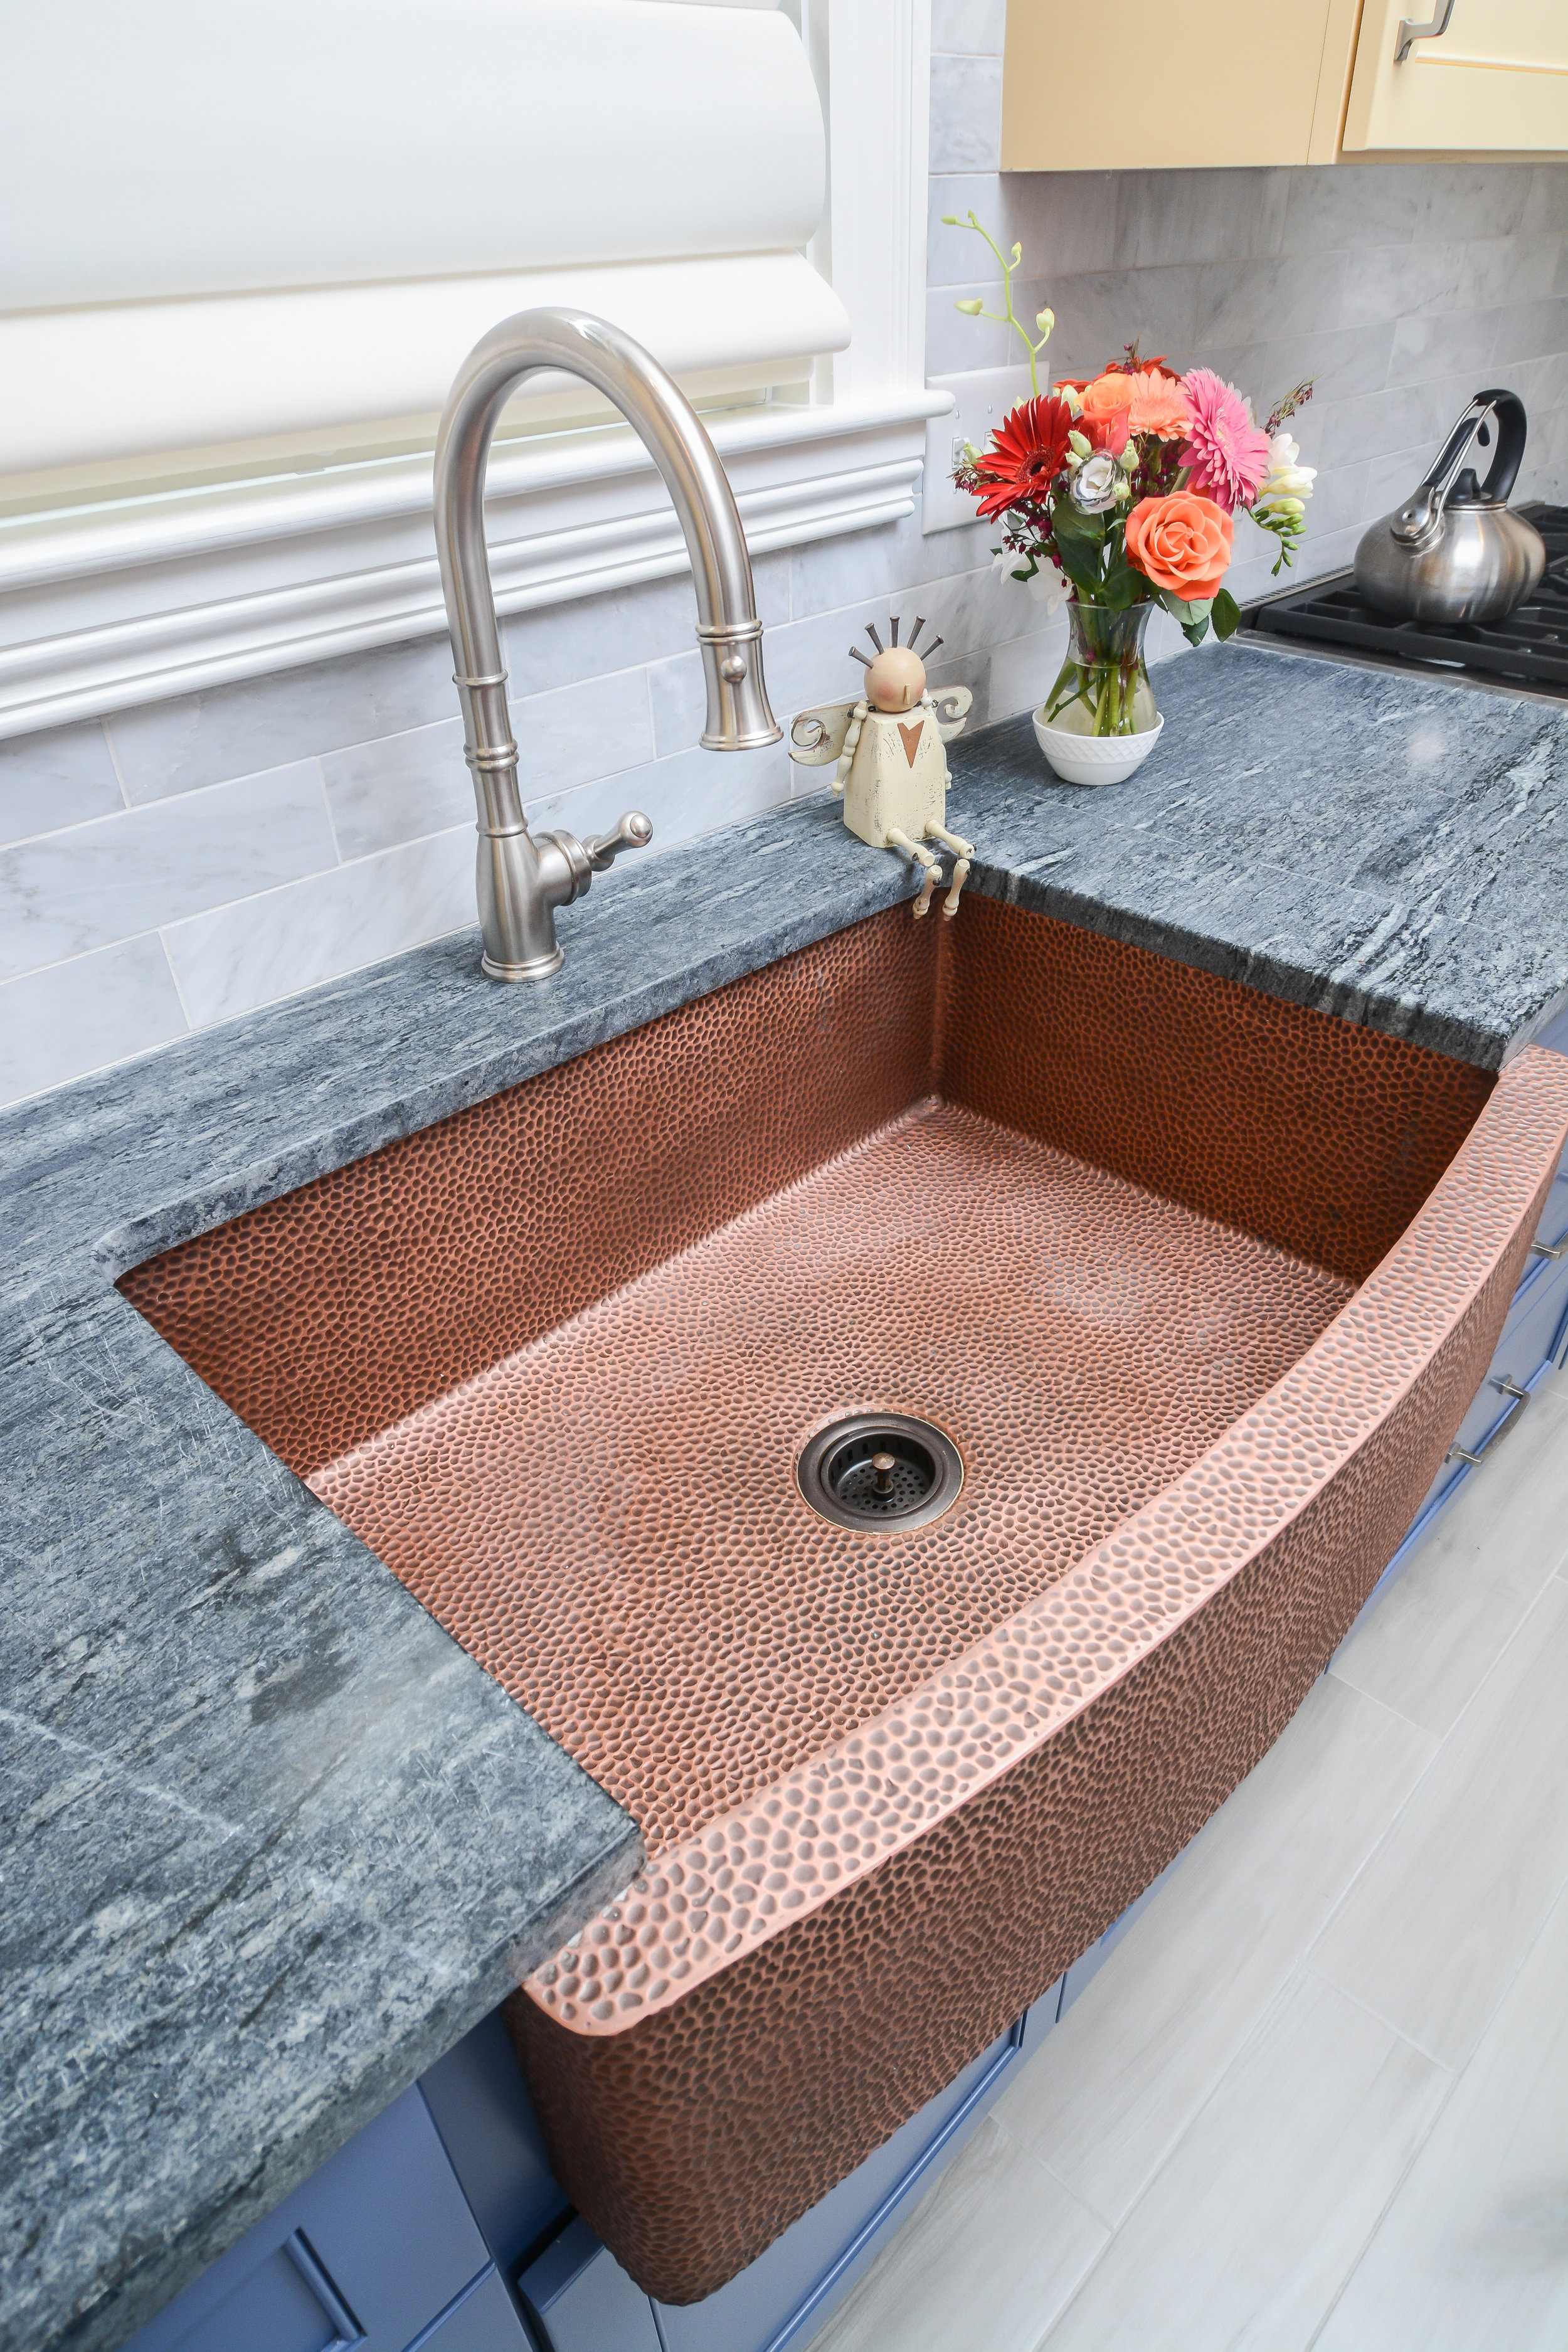 Copper sink will patina over time